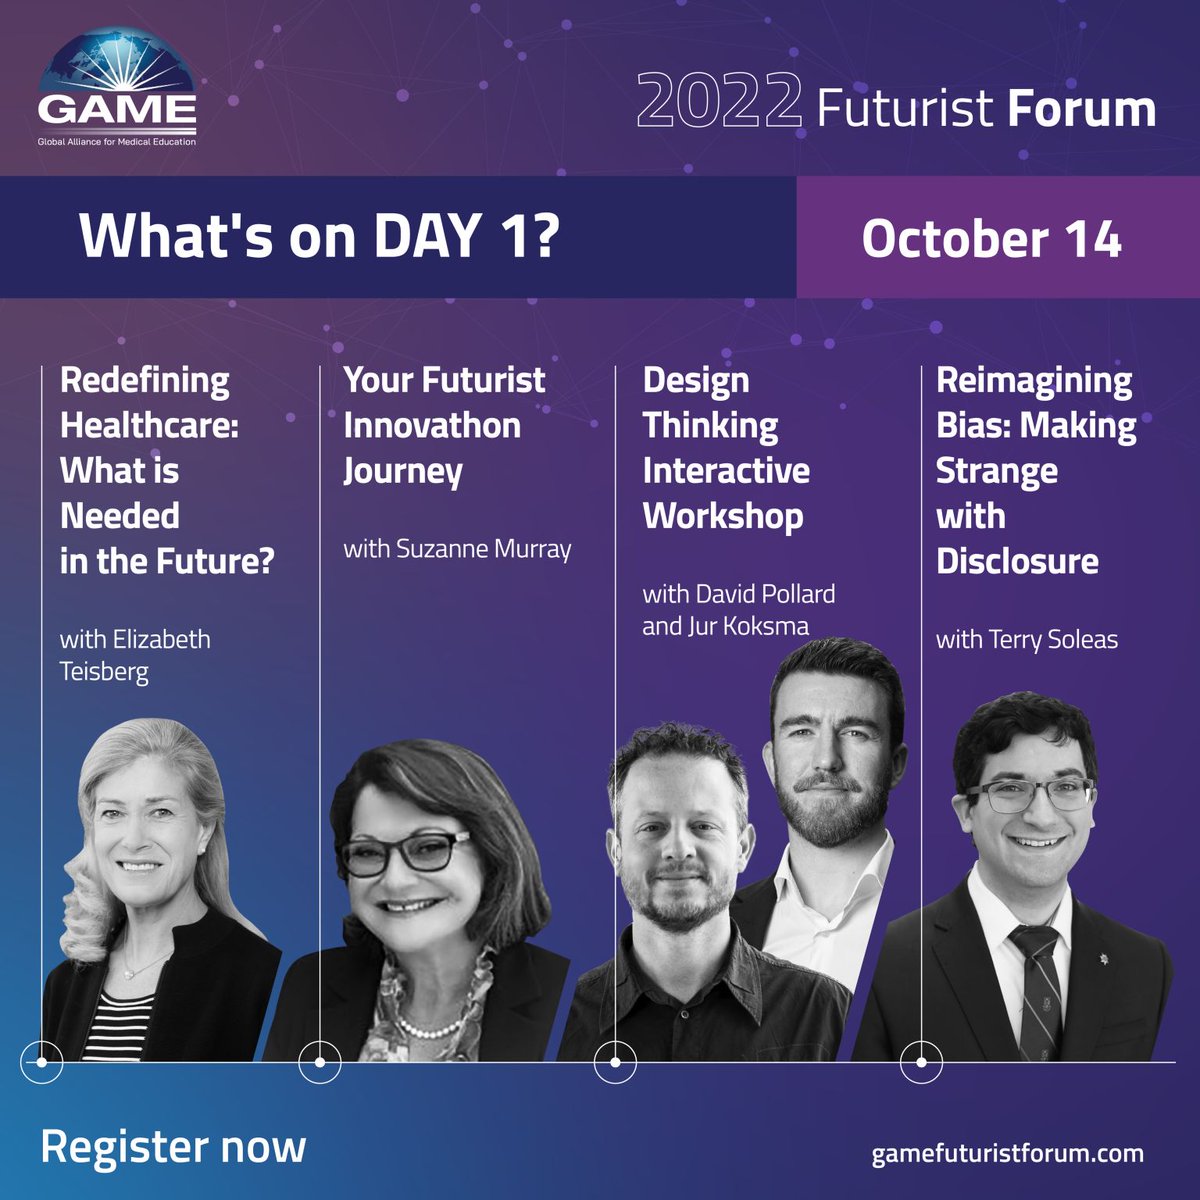 Engage with futurist experts and gain hands-on learning on working in regional teams to develop award-winning innovative projects. The 2022 GAME #FuturistForum conference will be held on October 14-15 in Montreal, Canada. Register here: gamefuturistforum.com Day 2 sessions: